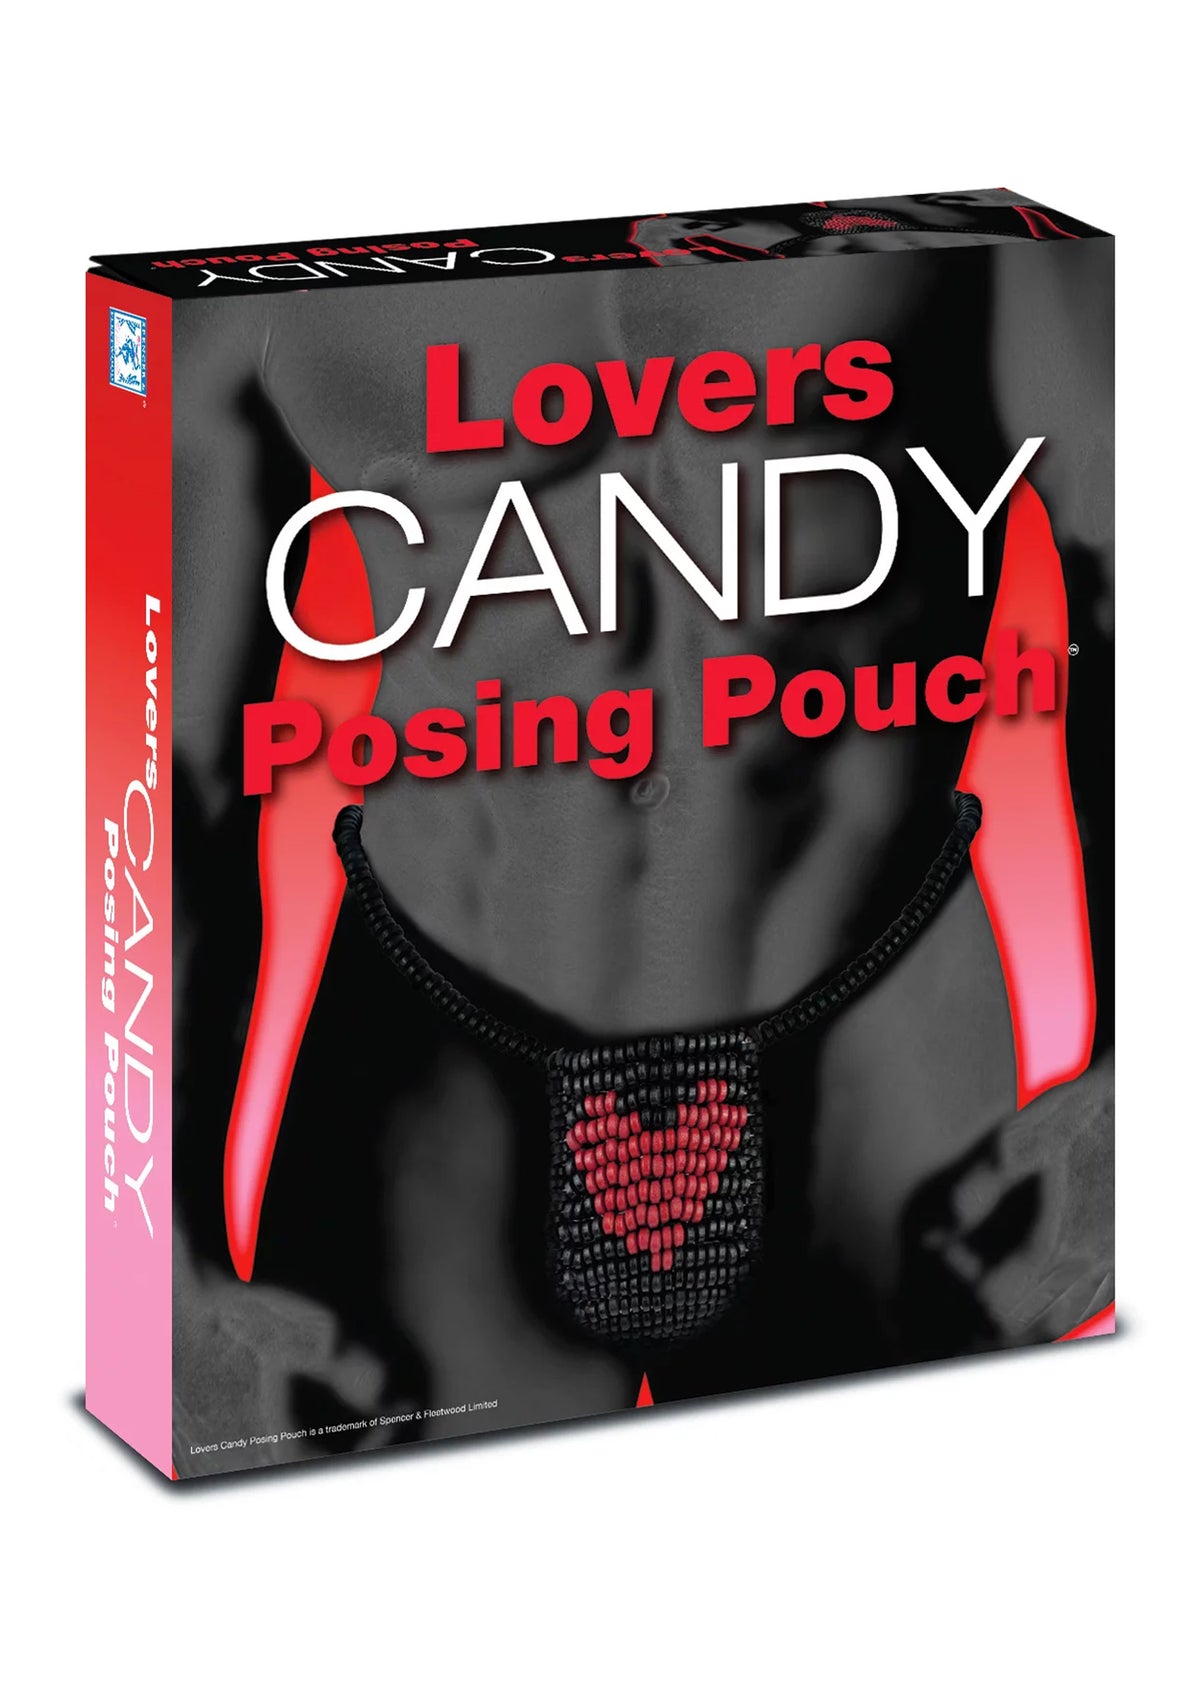 Lovers Posing Pouch